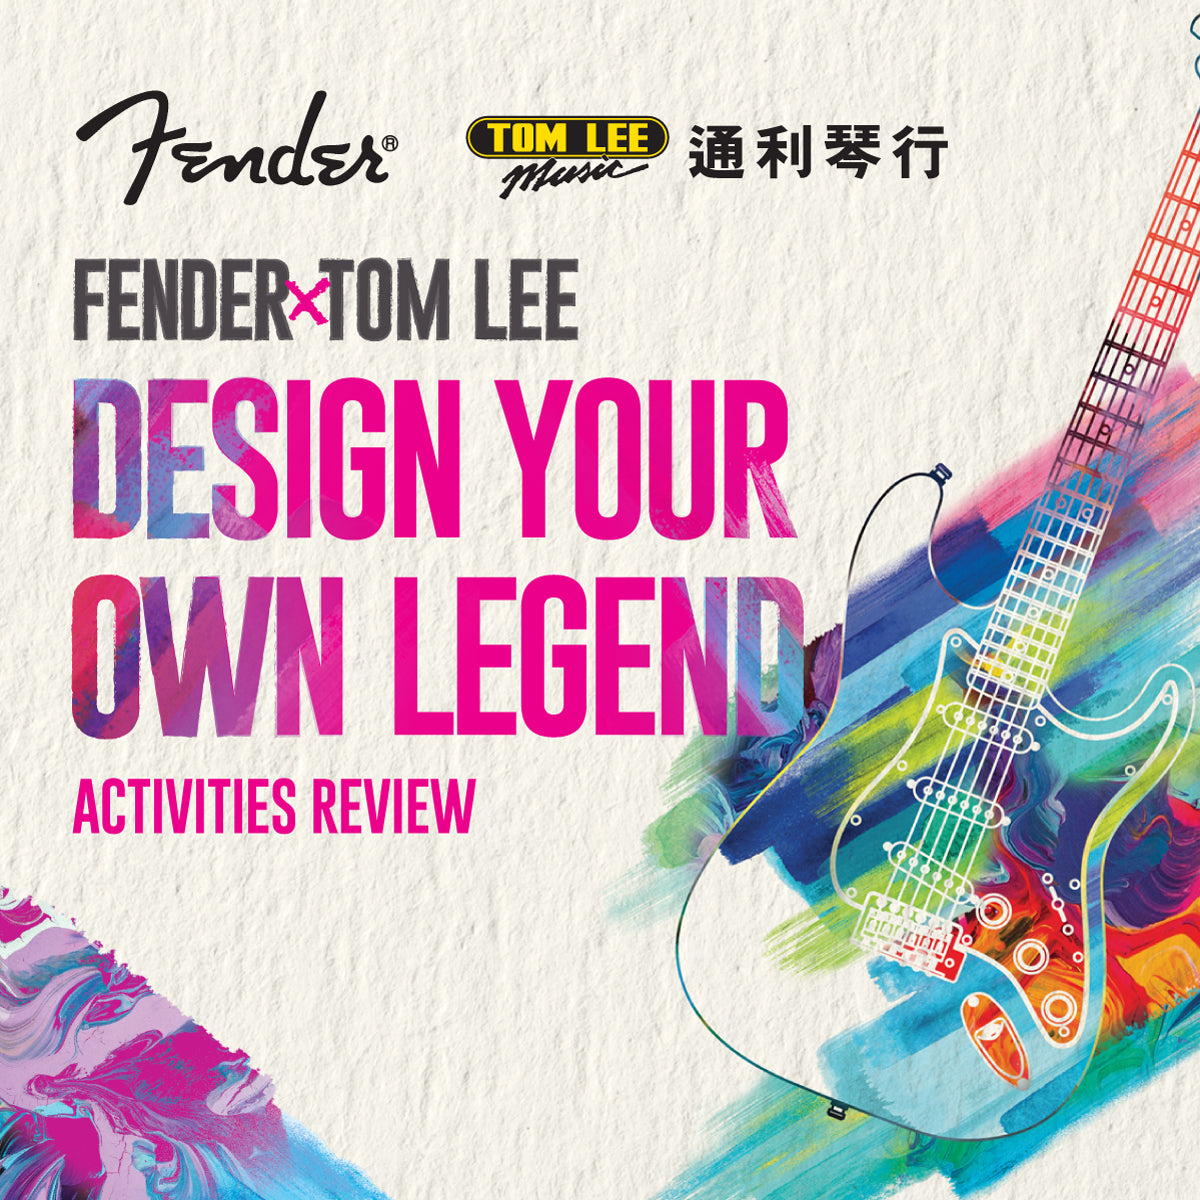 fender tomlee Design Your Own Legend Competition